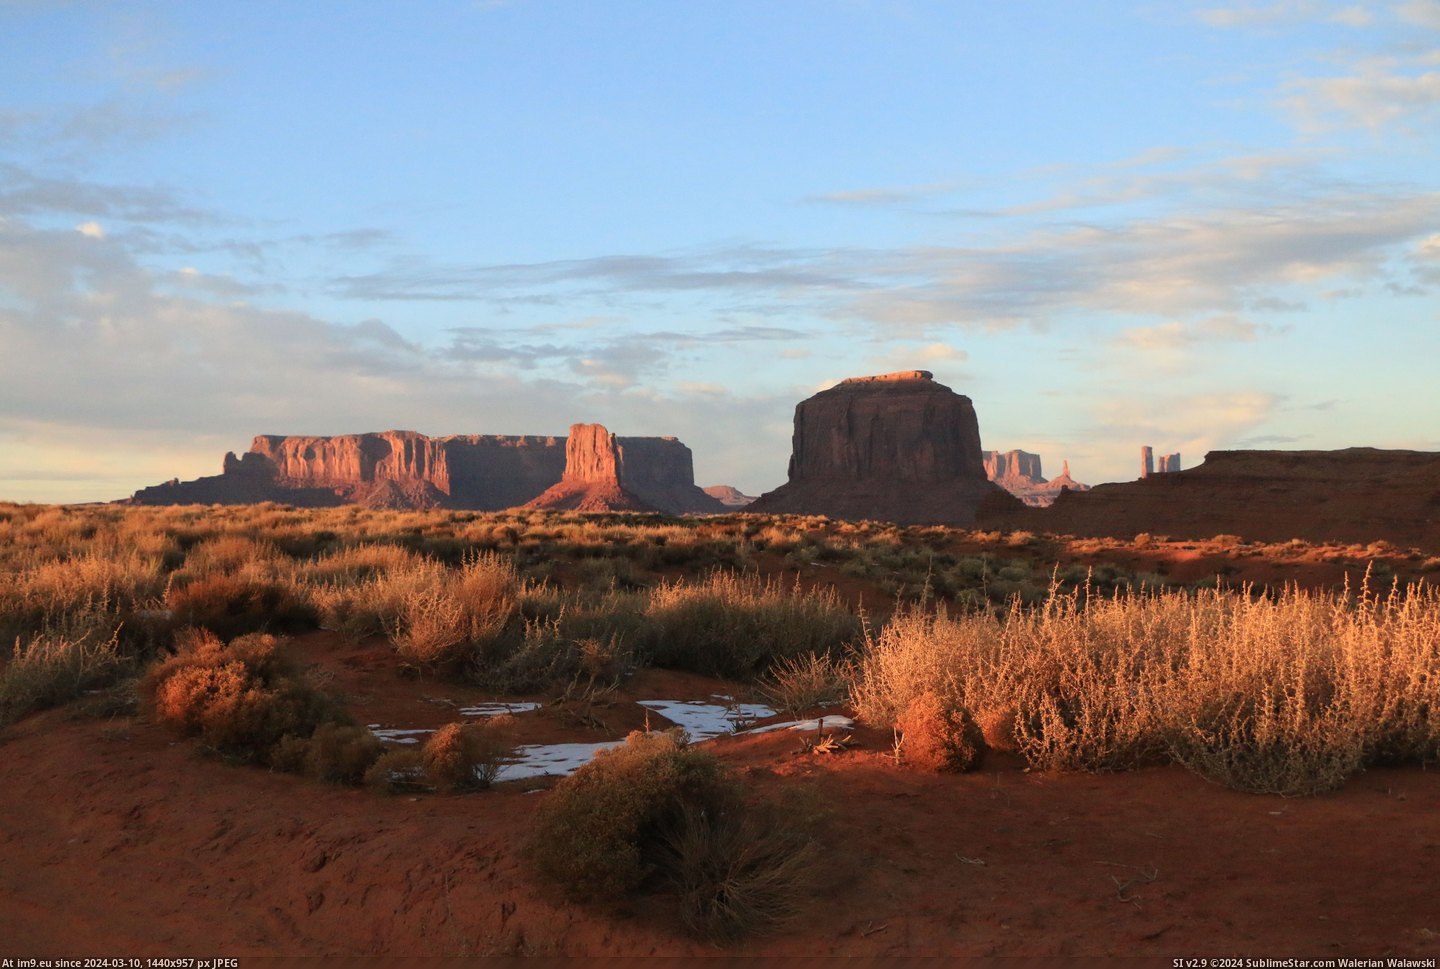 #Wallpaper #Beautiful #Favorite #Sunset #Desert #Clouds #Monument #Canon #Valley #Place #Sky #Utah [Earthporn] My favorite place Monument Valley, Utah. December 28th 2015. Sunset. (Canon 70D)  [4096x2732] Pic. (Image of album My r/EARTHPORN favs))